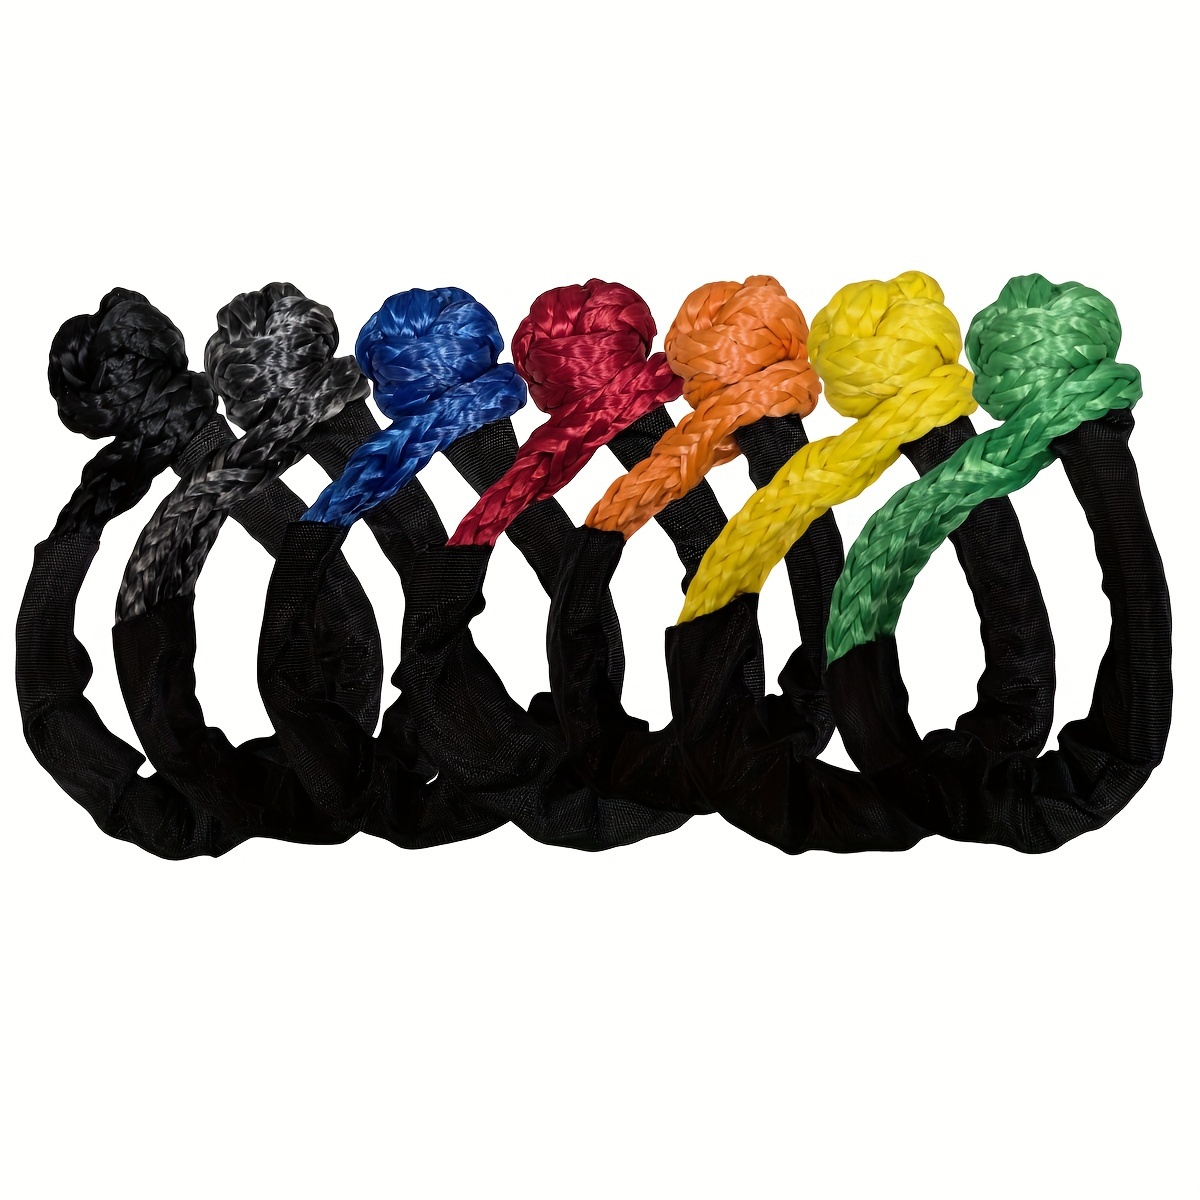 

Uhmwpe Synthetic Soft Shackle Rope 1/2in X 22in (17ton/38, 000lbs Breaking Strength) With Protective Sleeve